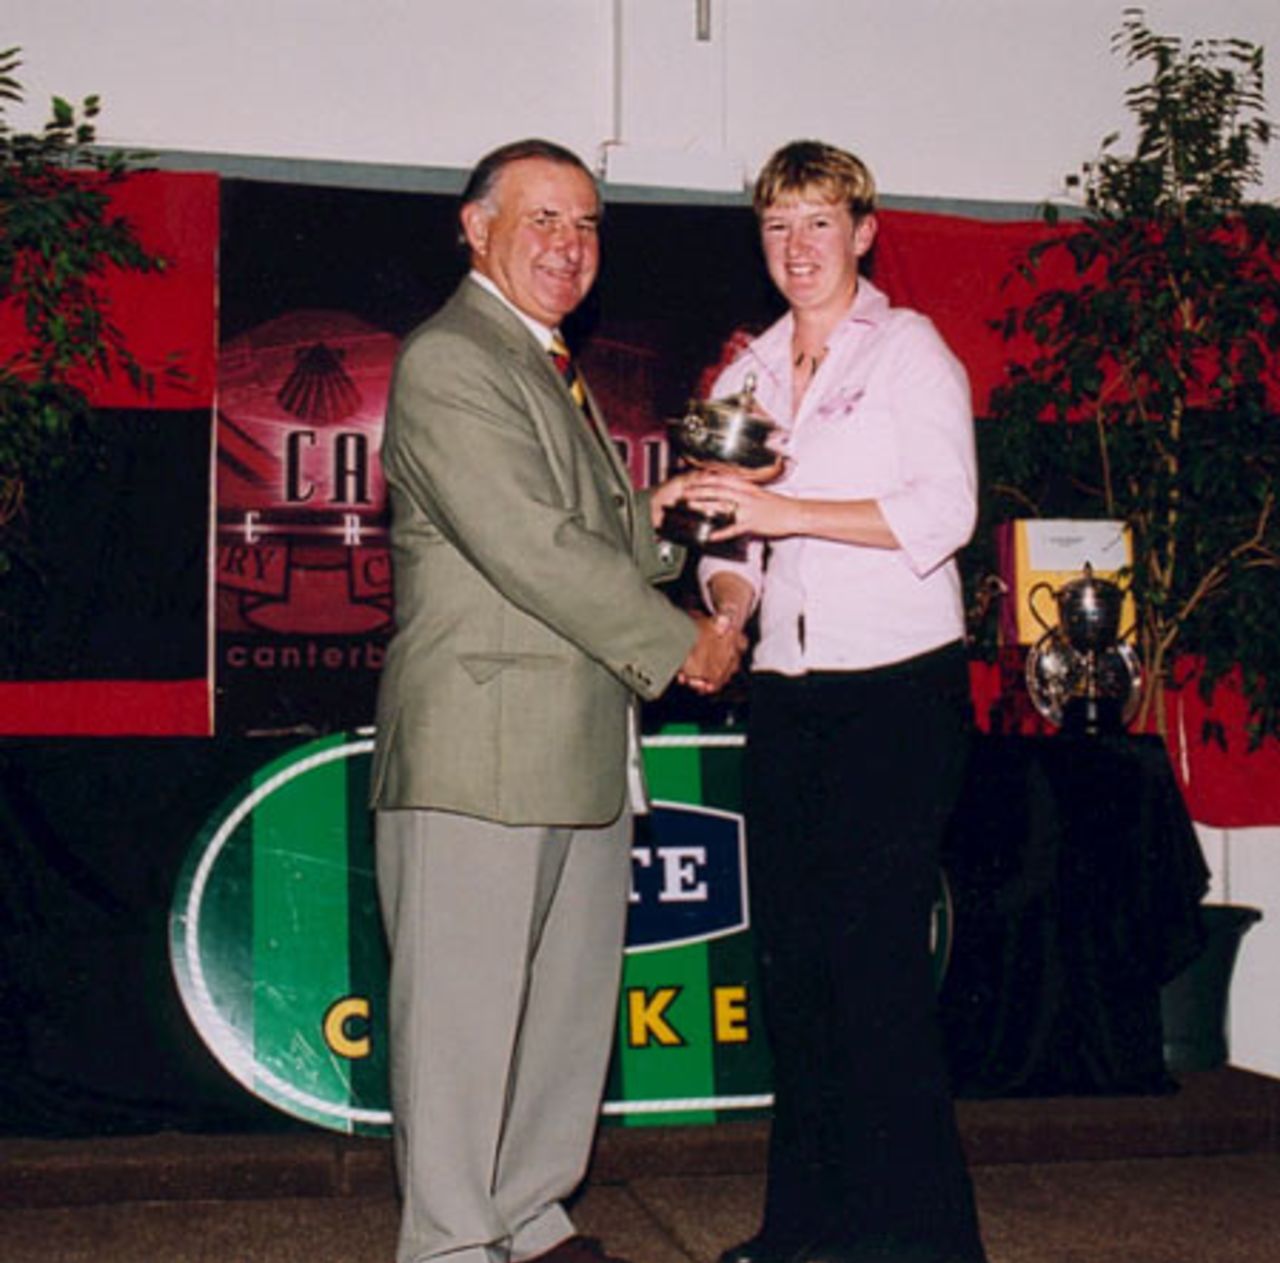 East Christchurch-Shirley bowler Helen Daly (right) receives the Felton Trophy for taking the most wickets in women's first grade from Canterbury Cricket Association president Brian Adams. Canterbury Cricket Association Awards 2002/03 at the Canterbury Horticultural Society Hall at Christchurch, 10 April 2003.